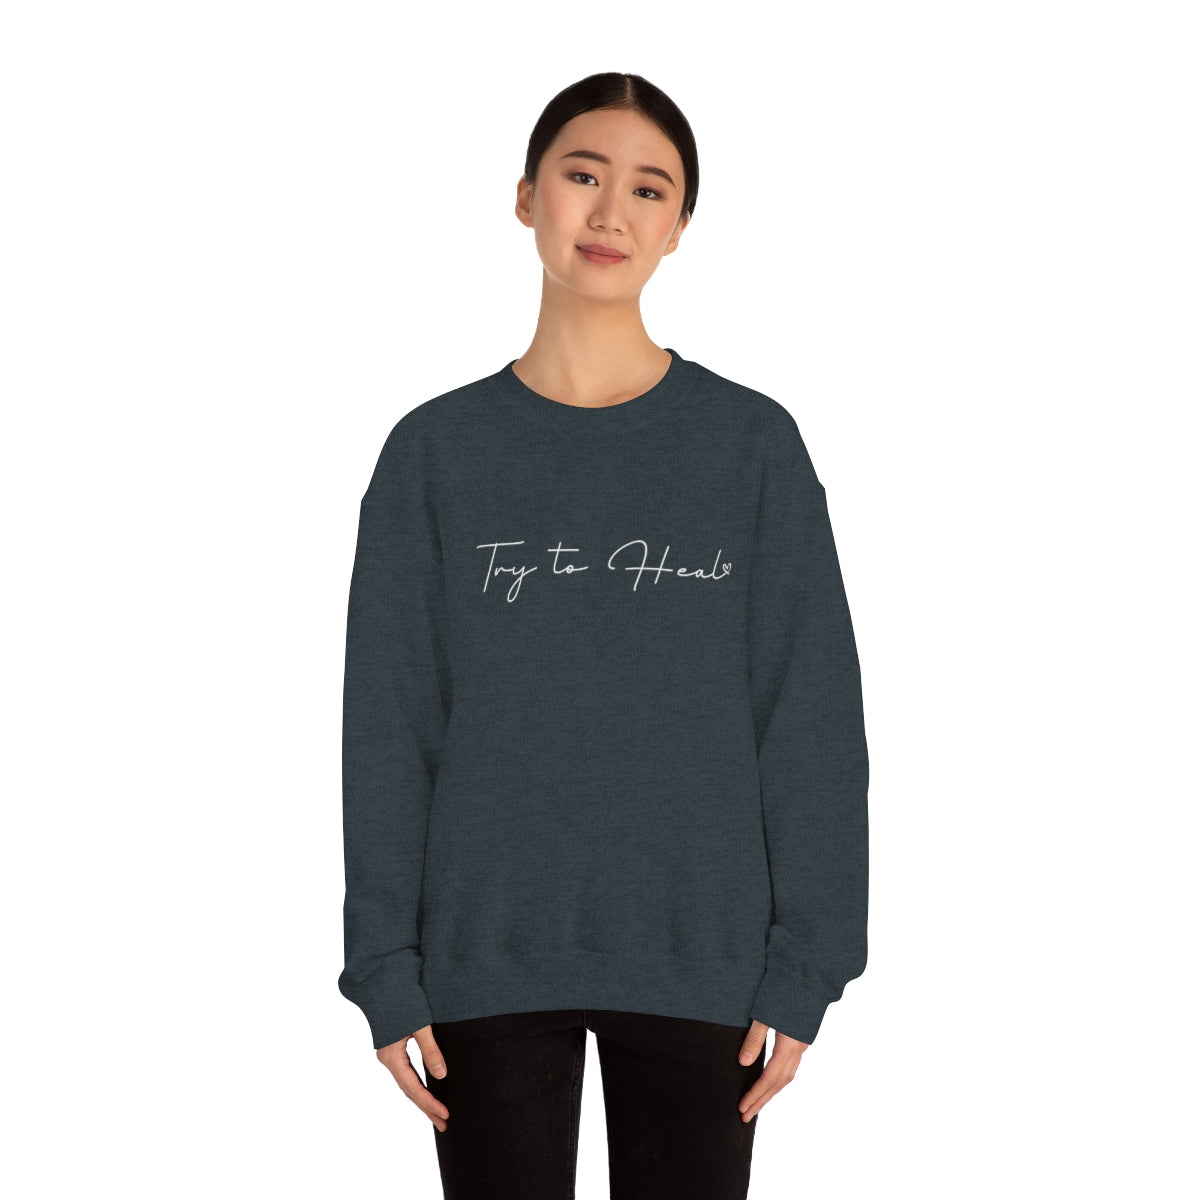 Try To Heal Crewneck Sweater Inspirational Sweatshirt, Sweater, Motivational Sweater, Gift For Women, Trauma Recovery